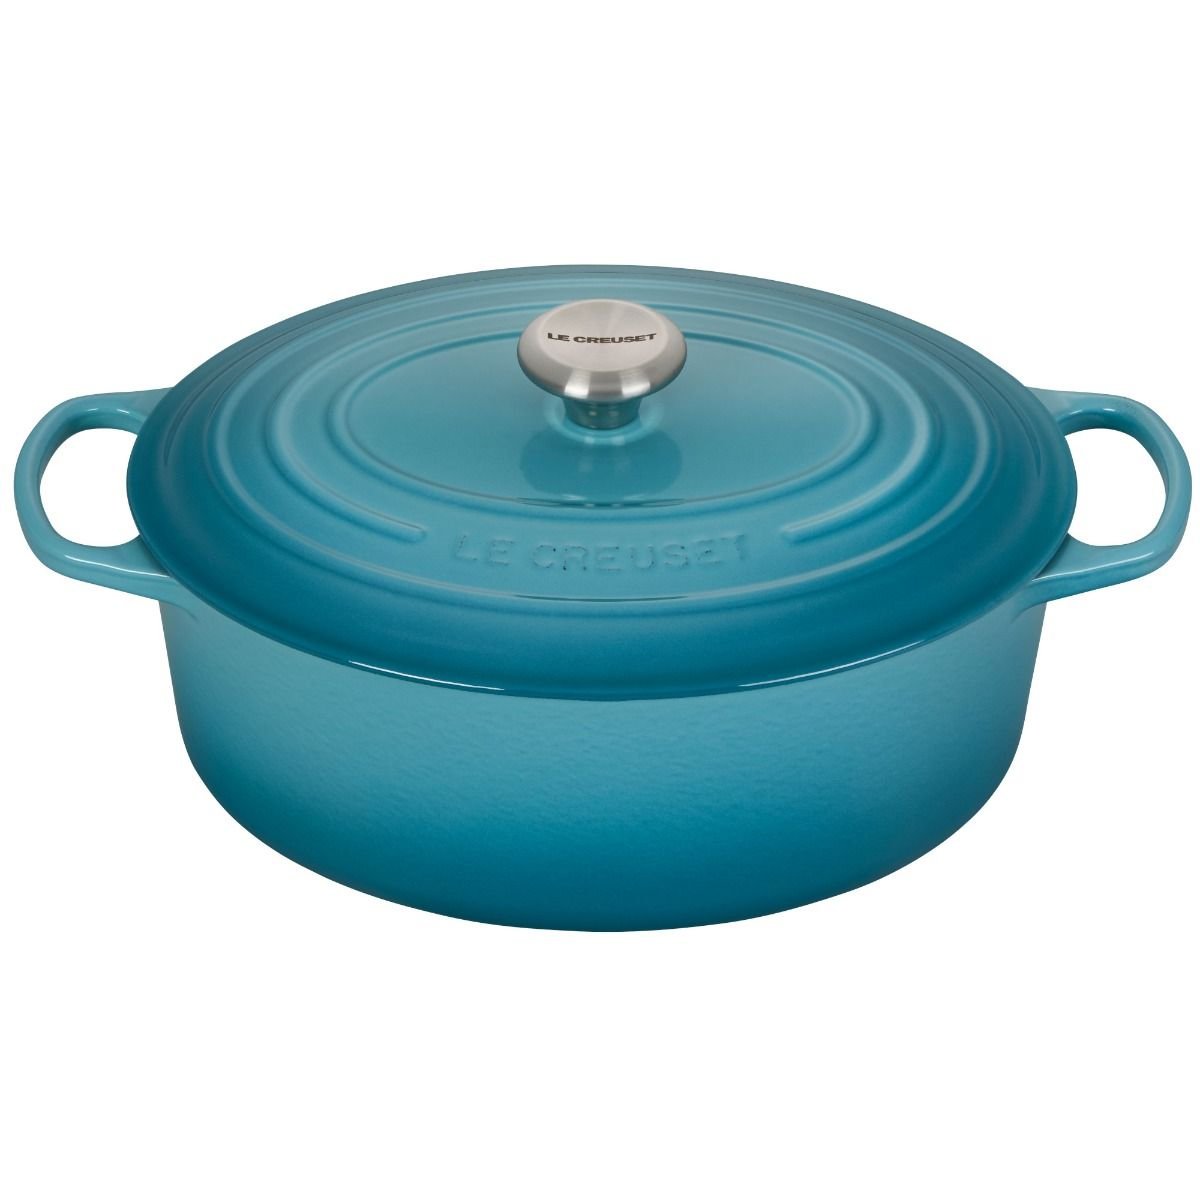  All-Clad Cast Iron Enameled Dutch Oven with Acacia